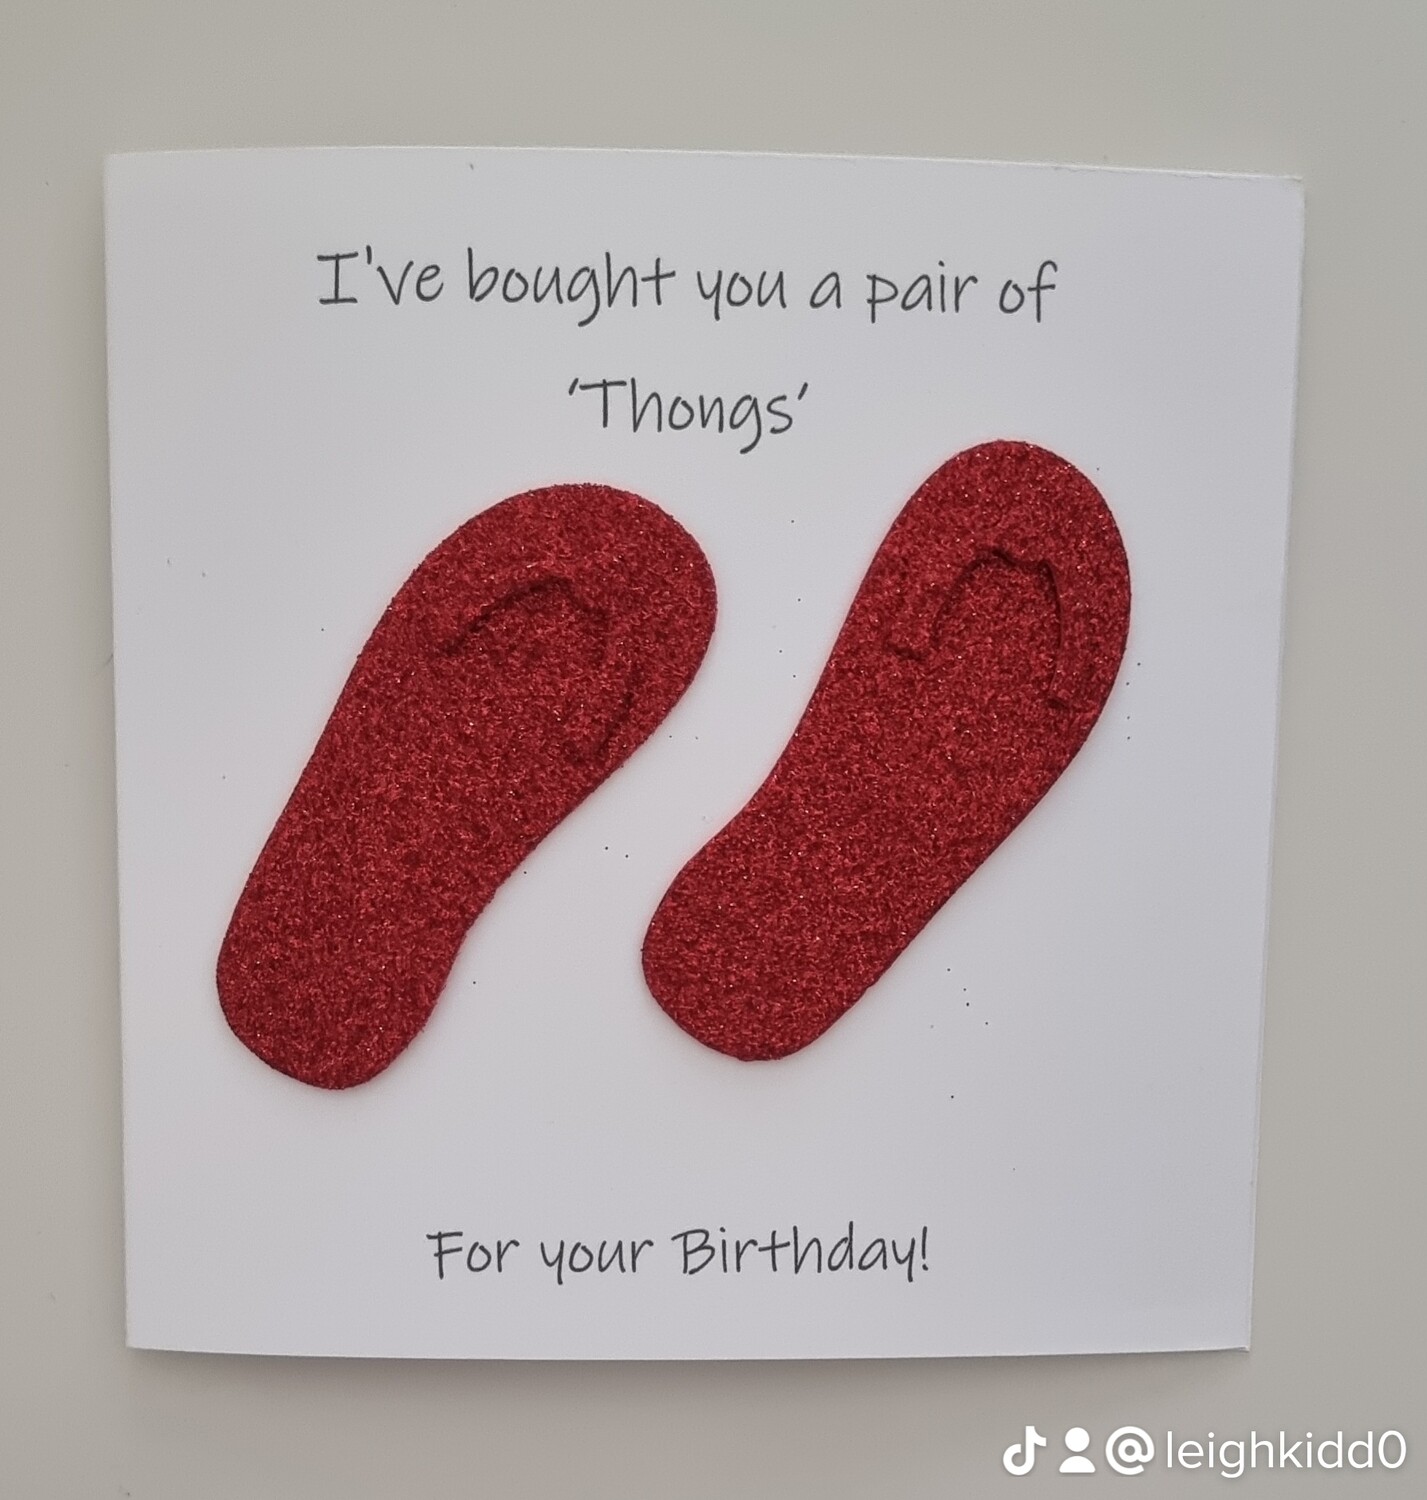 I've bought you a pair of thongs - Fun red glitter Flip flop Birthday card